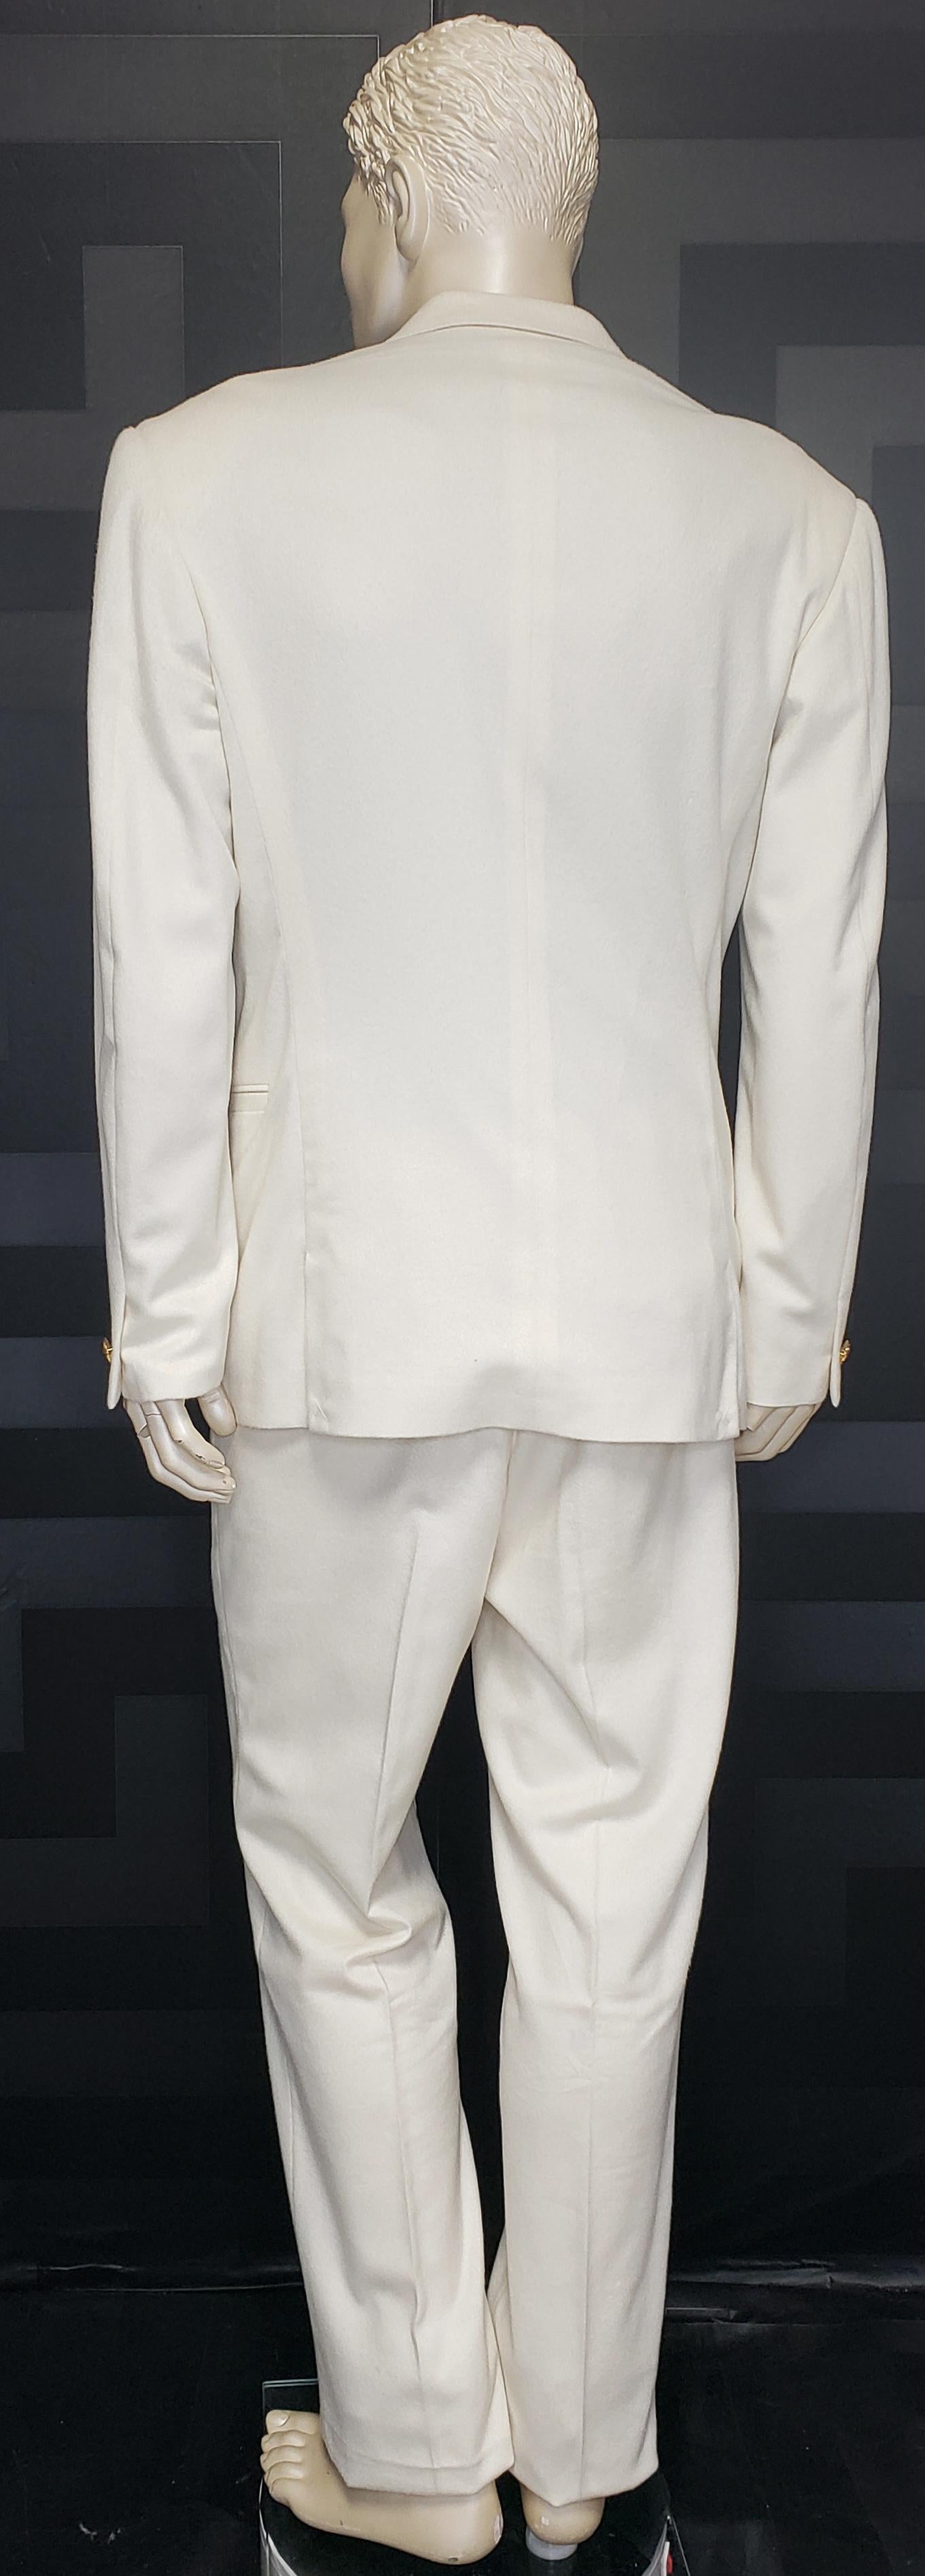 F/W2013 look #51 BRAND NEW VERSACE OFF WHITE 100% CASHMERE SUIT 50 - 40 (L) For Sale 1